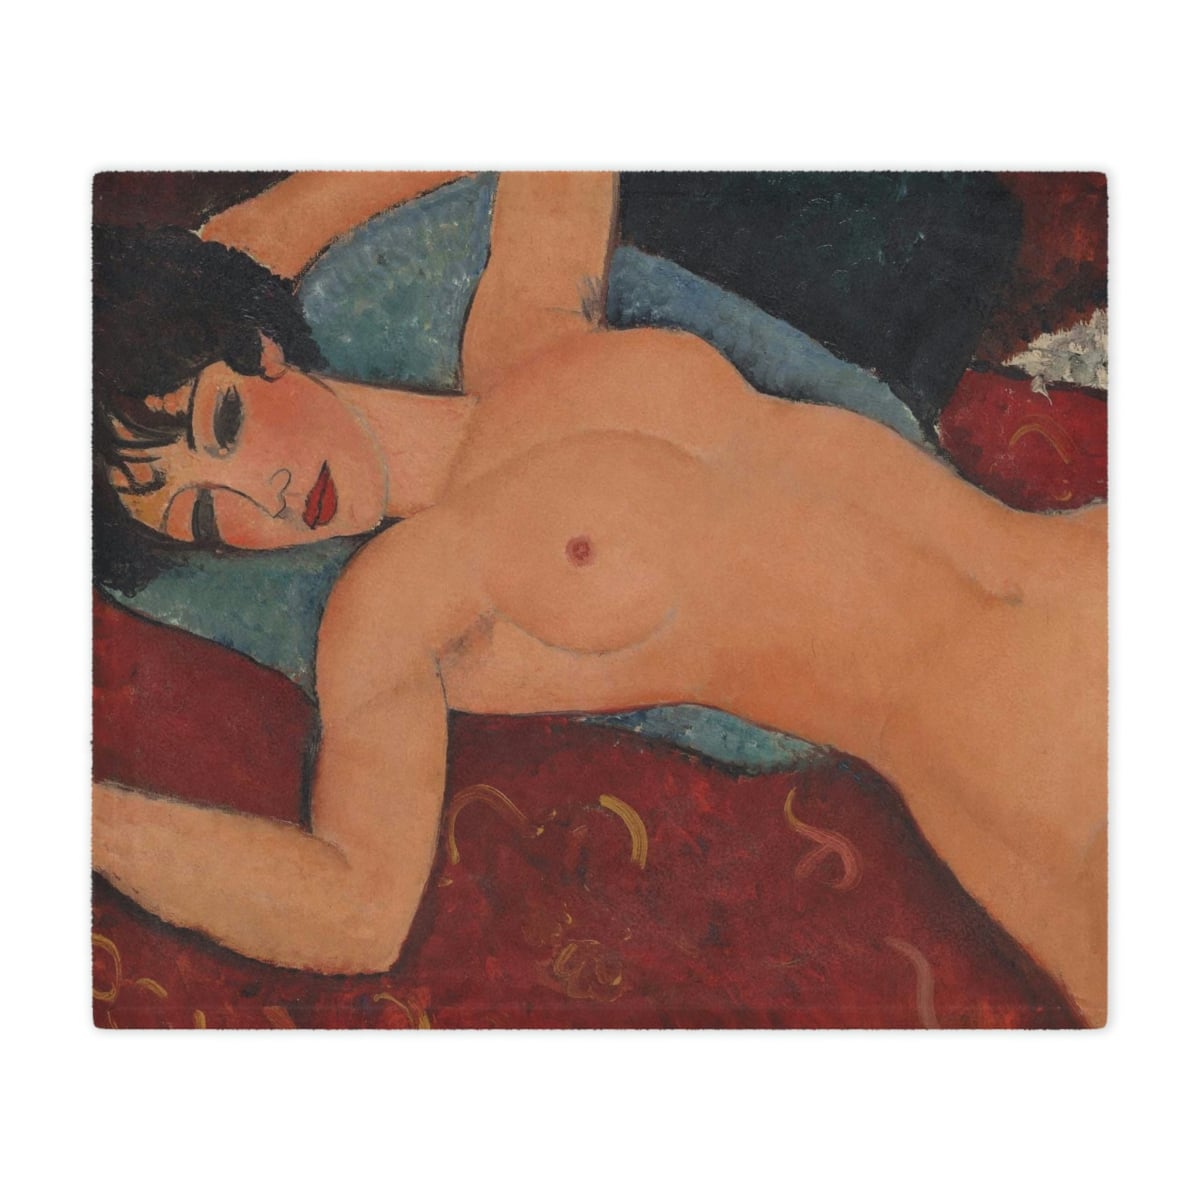 Luxuriously soft polyester fabric of the 'Nu couché' by Amedeo Modigliani Art Blanket